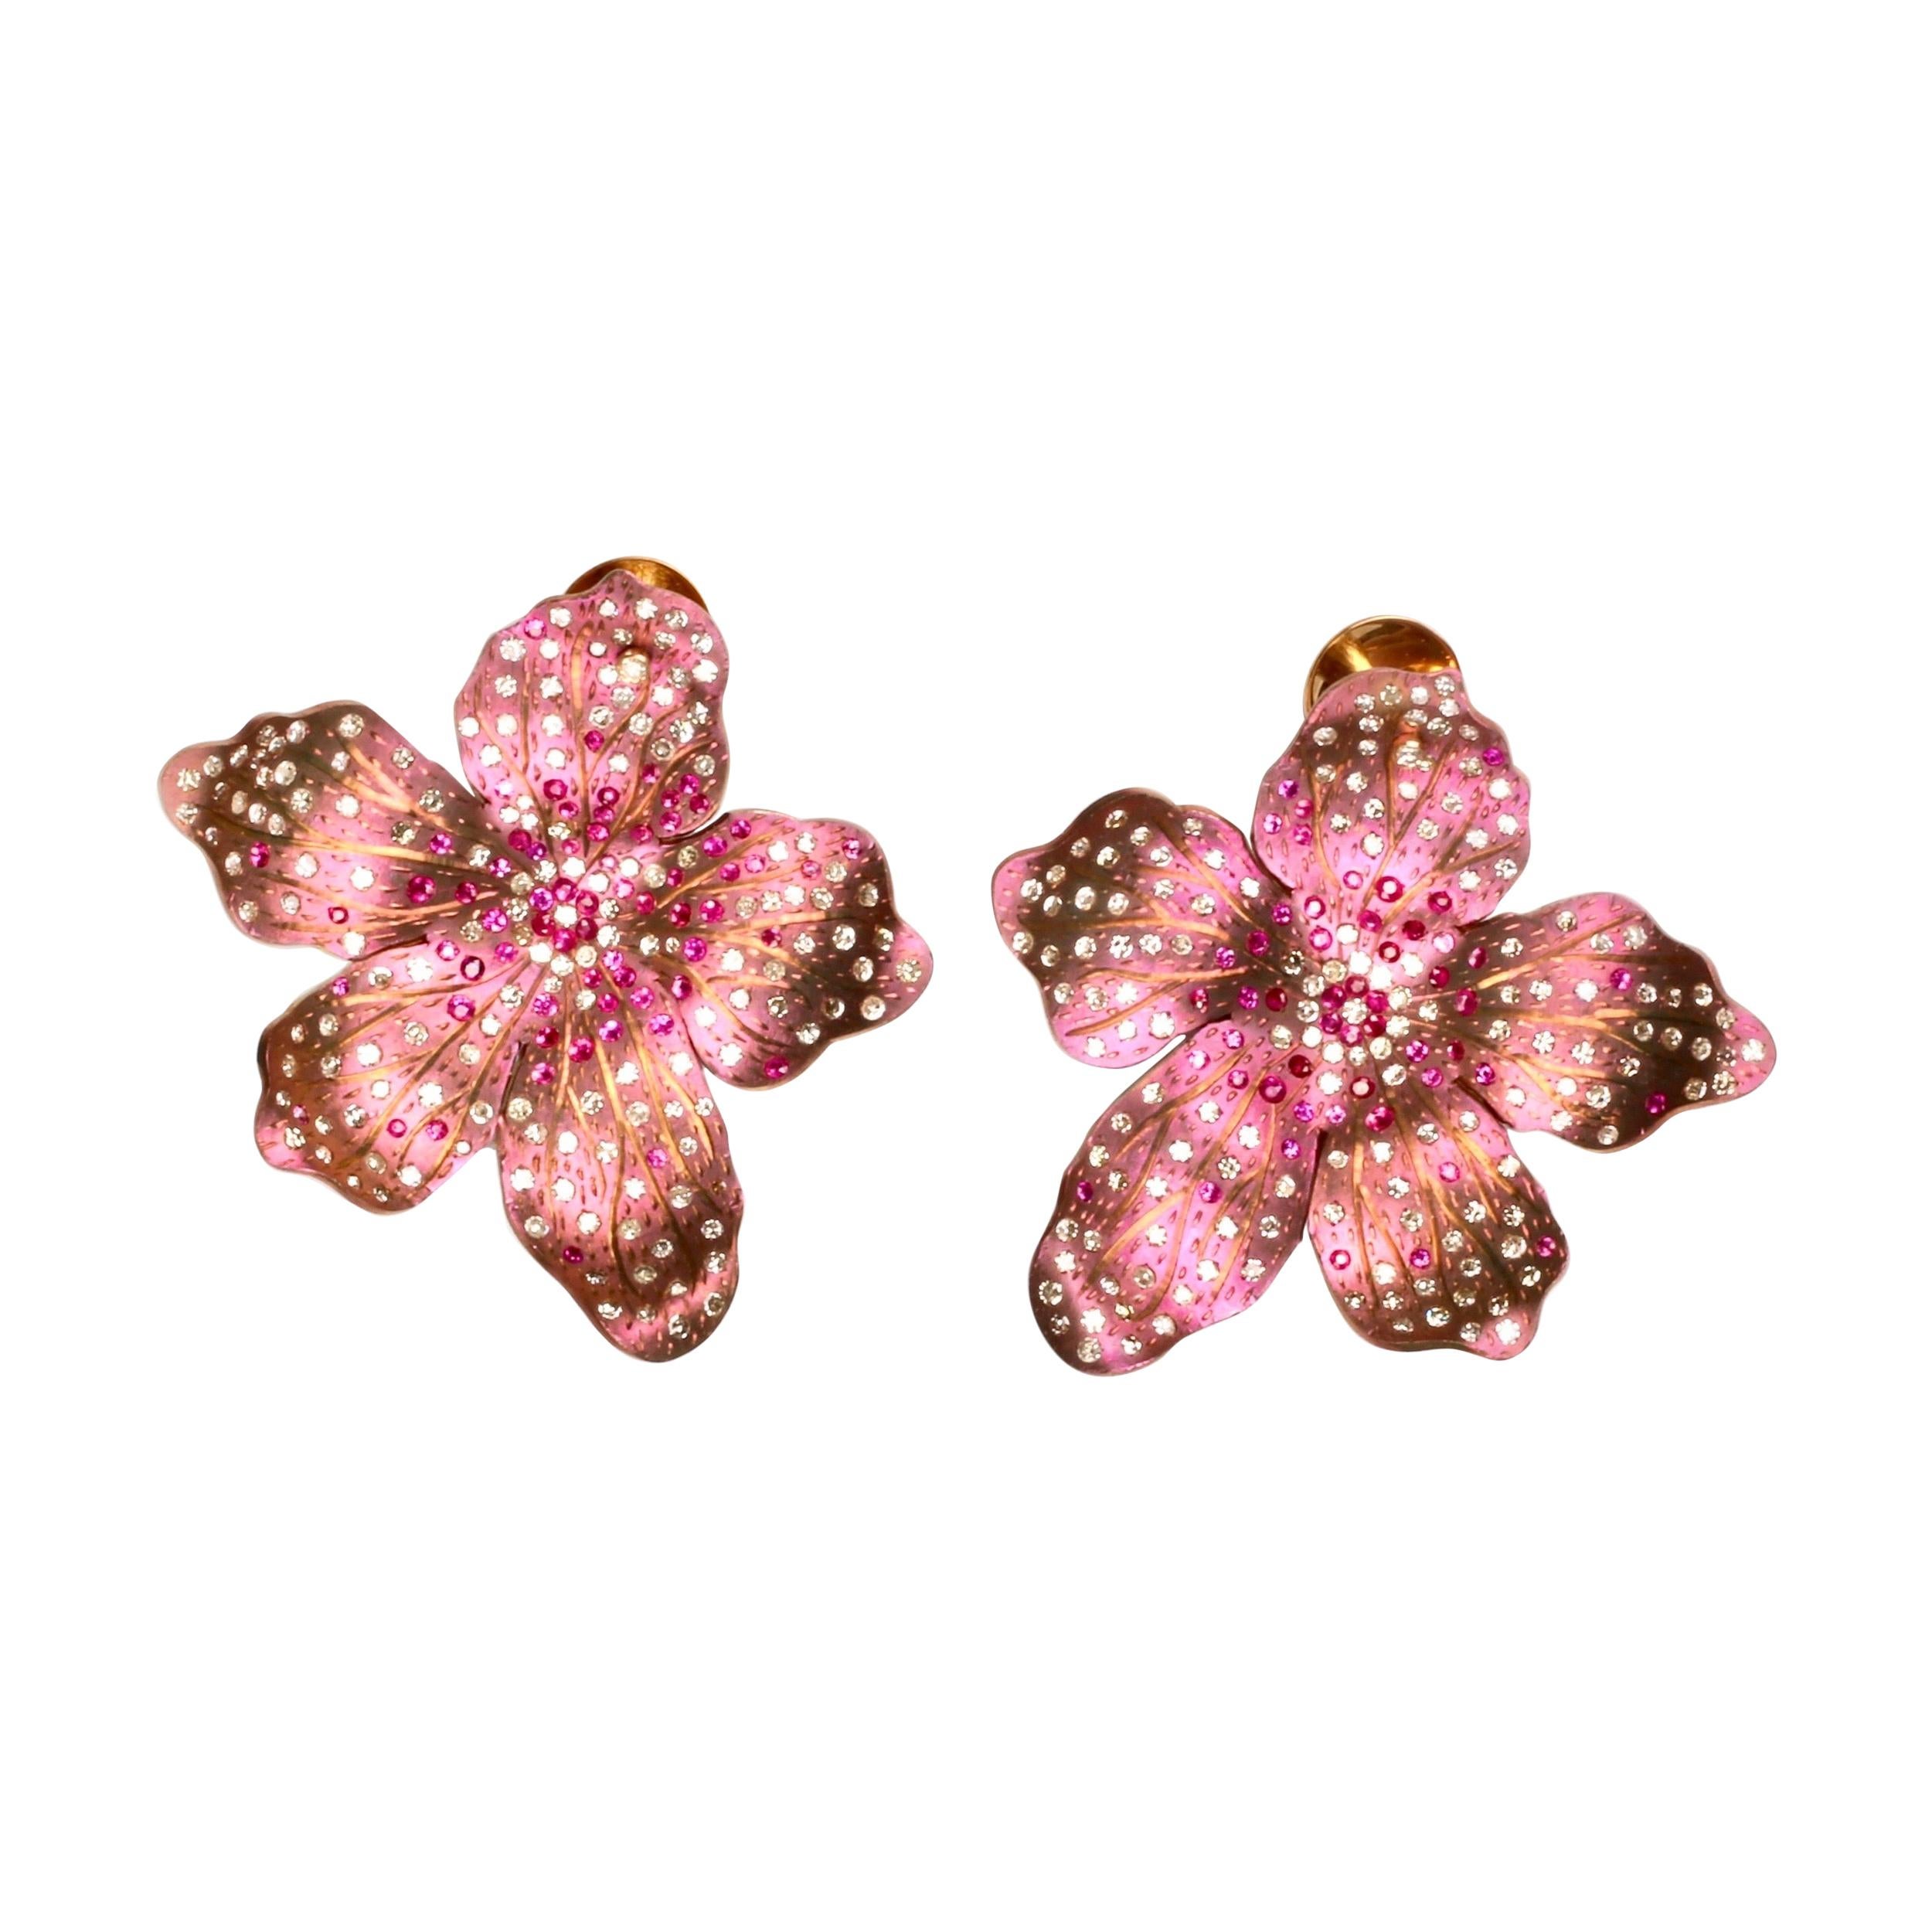 Periwinkle Titanium Earrings with Rubies and Diamonds 18kt Gold For Sale